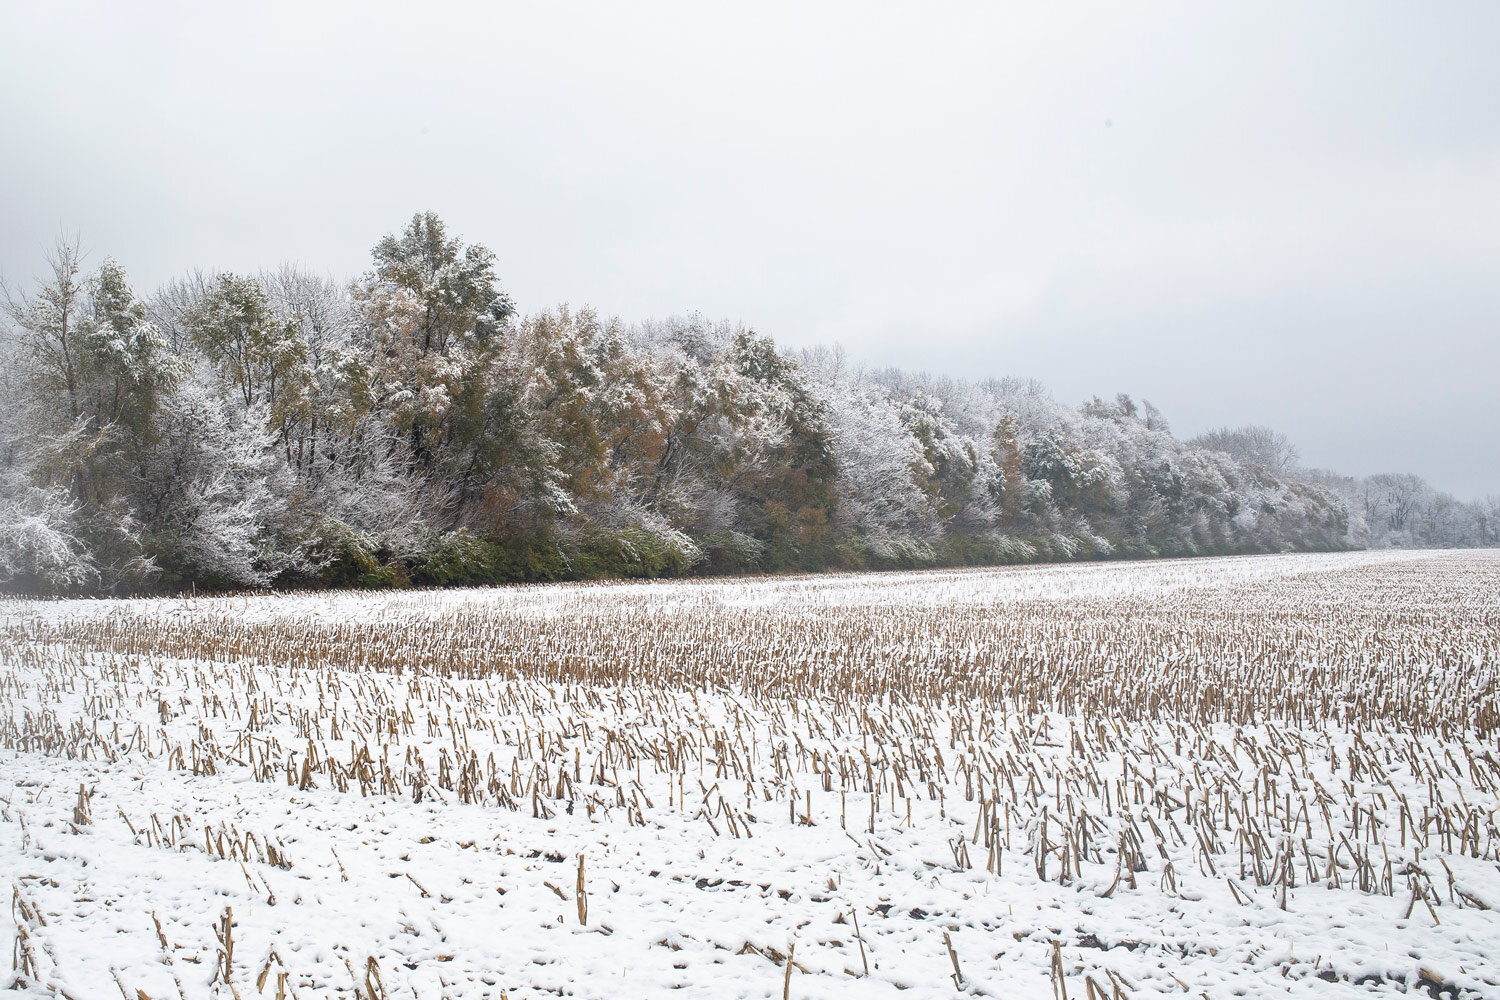  Snow covers corn stubble and the trees along the Interurban Trail Friday, Nov. 9, 2018 in Springfield, Ill. [Rich Saal/The State Journal-Register] 